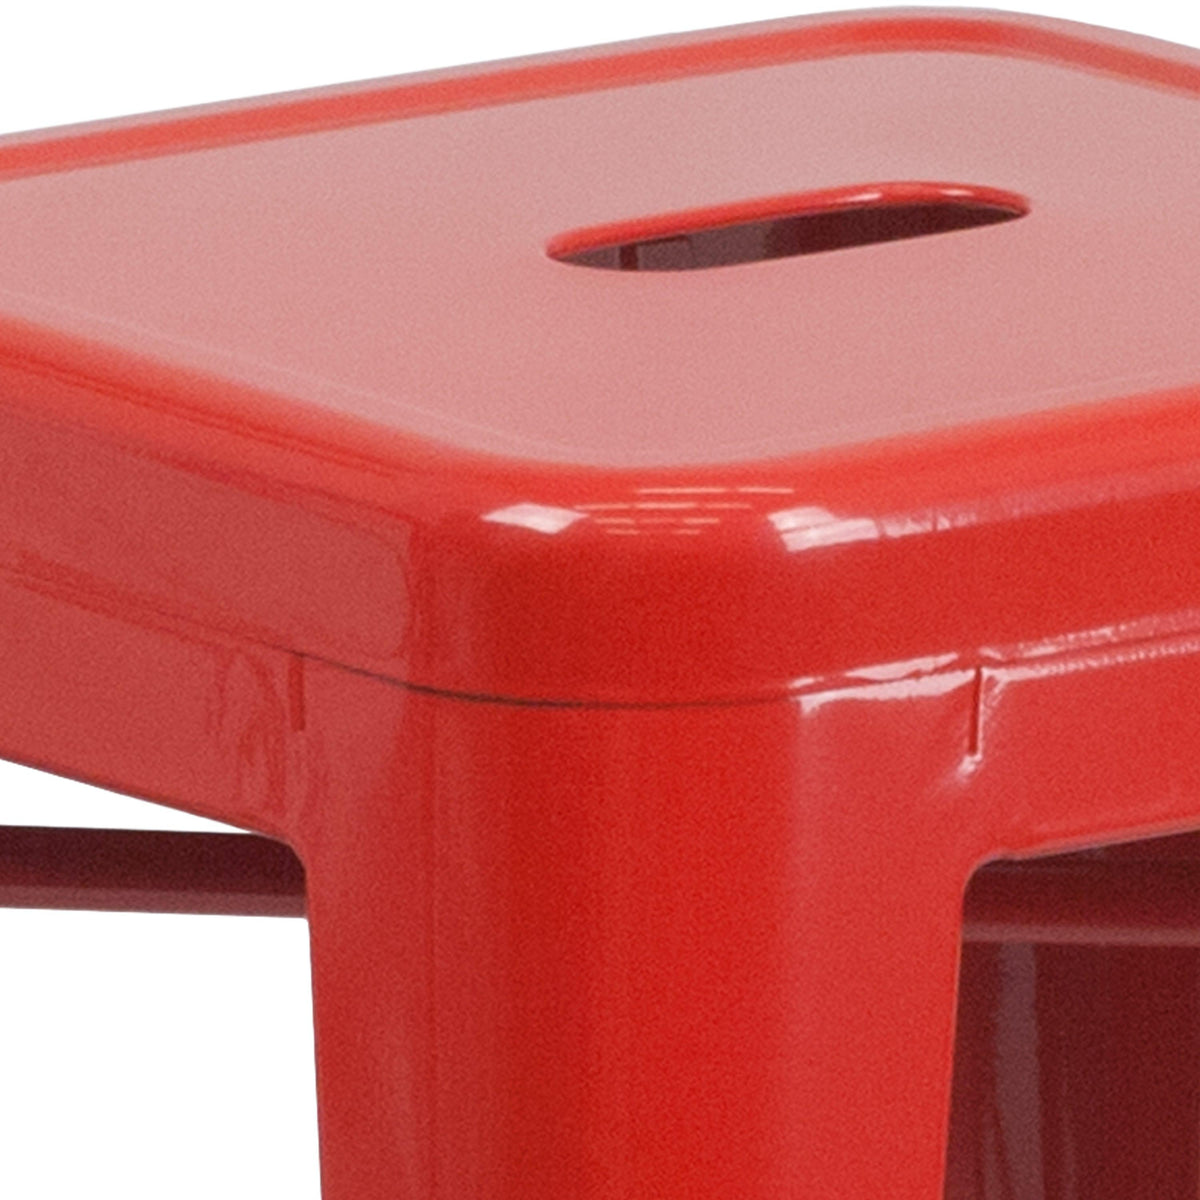 Red |#| Commercial Grade 24inchH Backless Red Metal Indoor-Outdoor Counter Height Stool